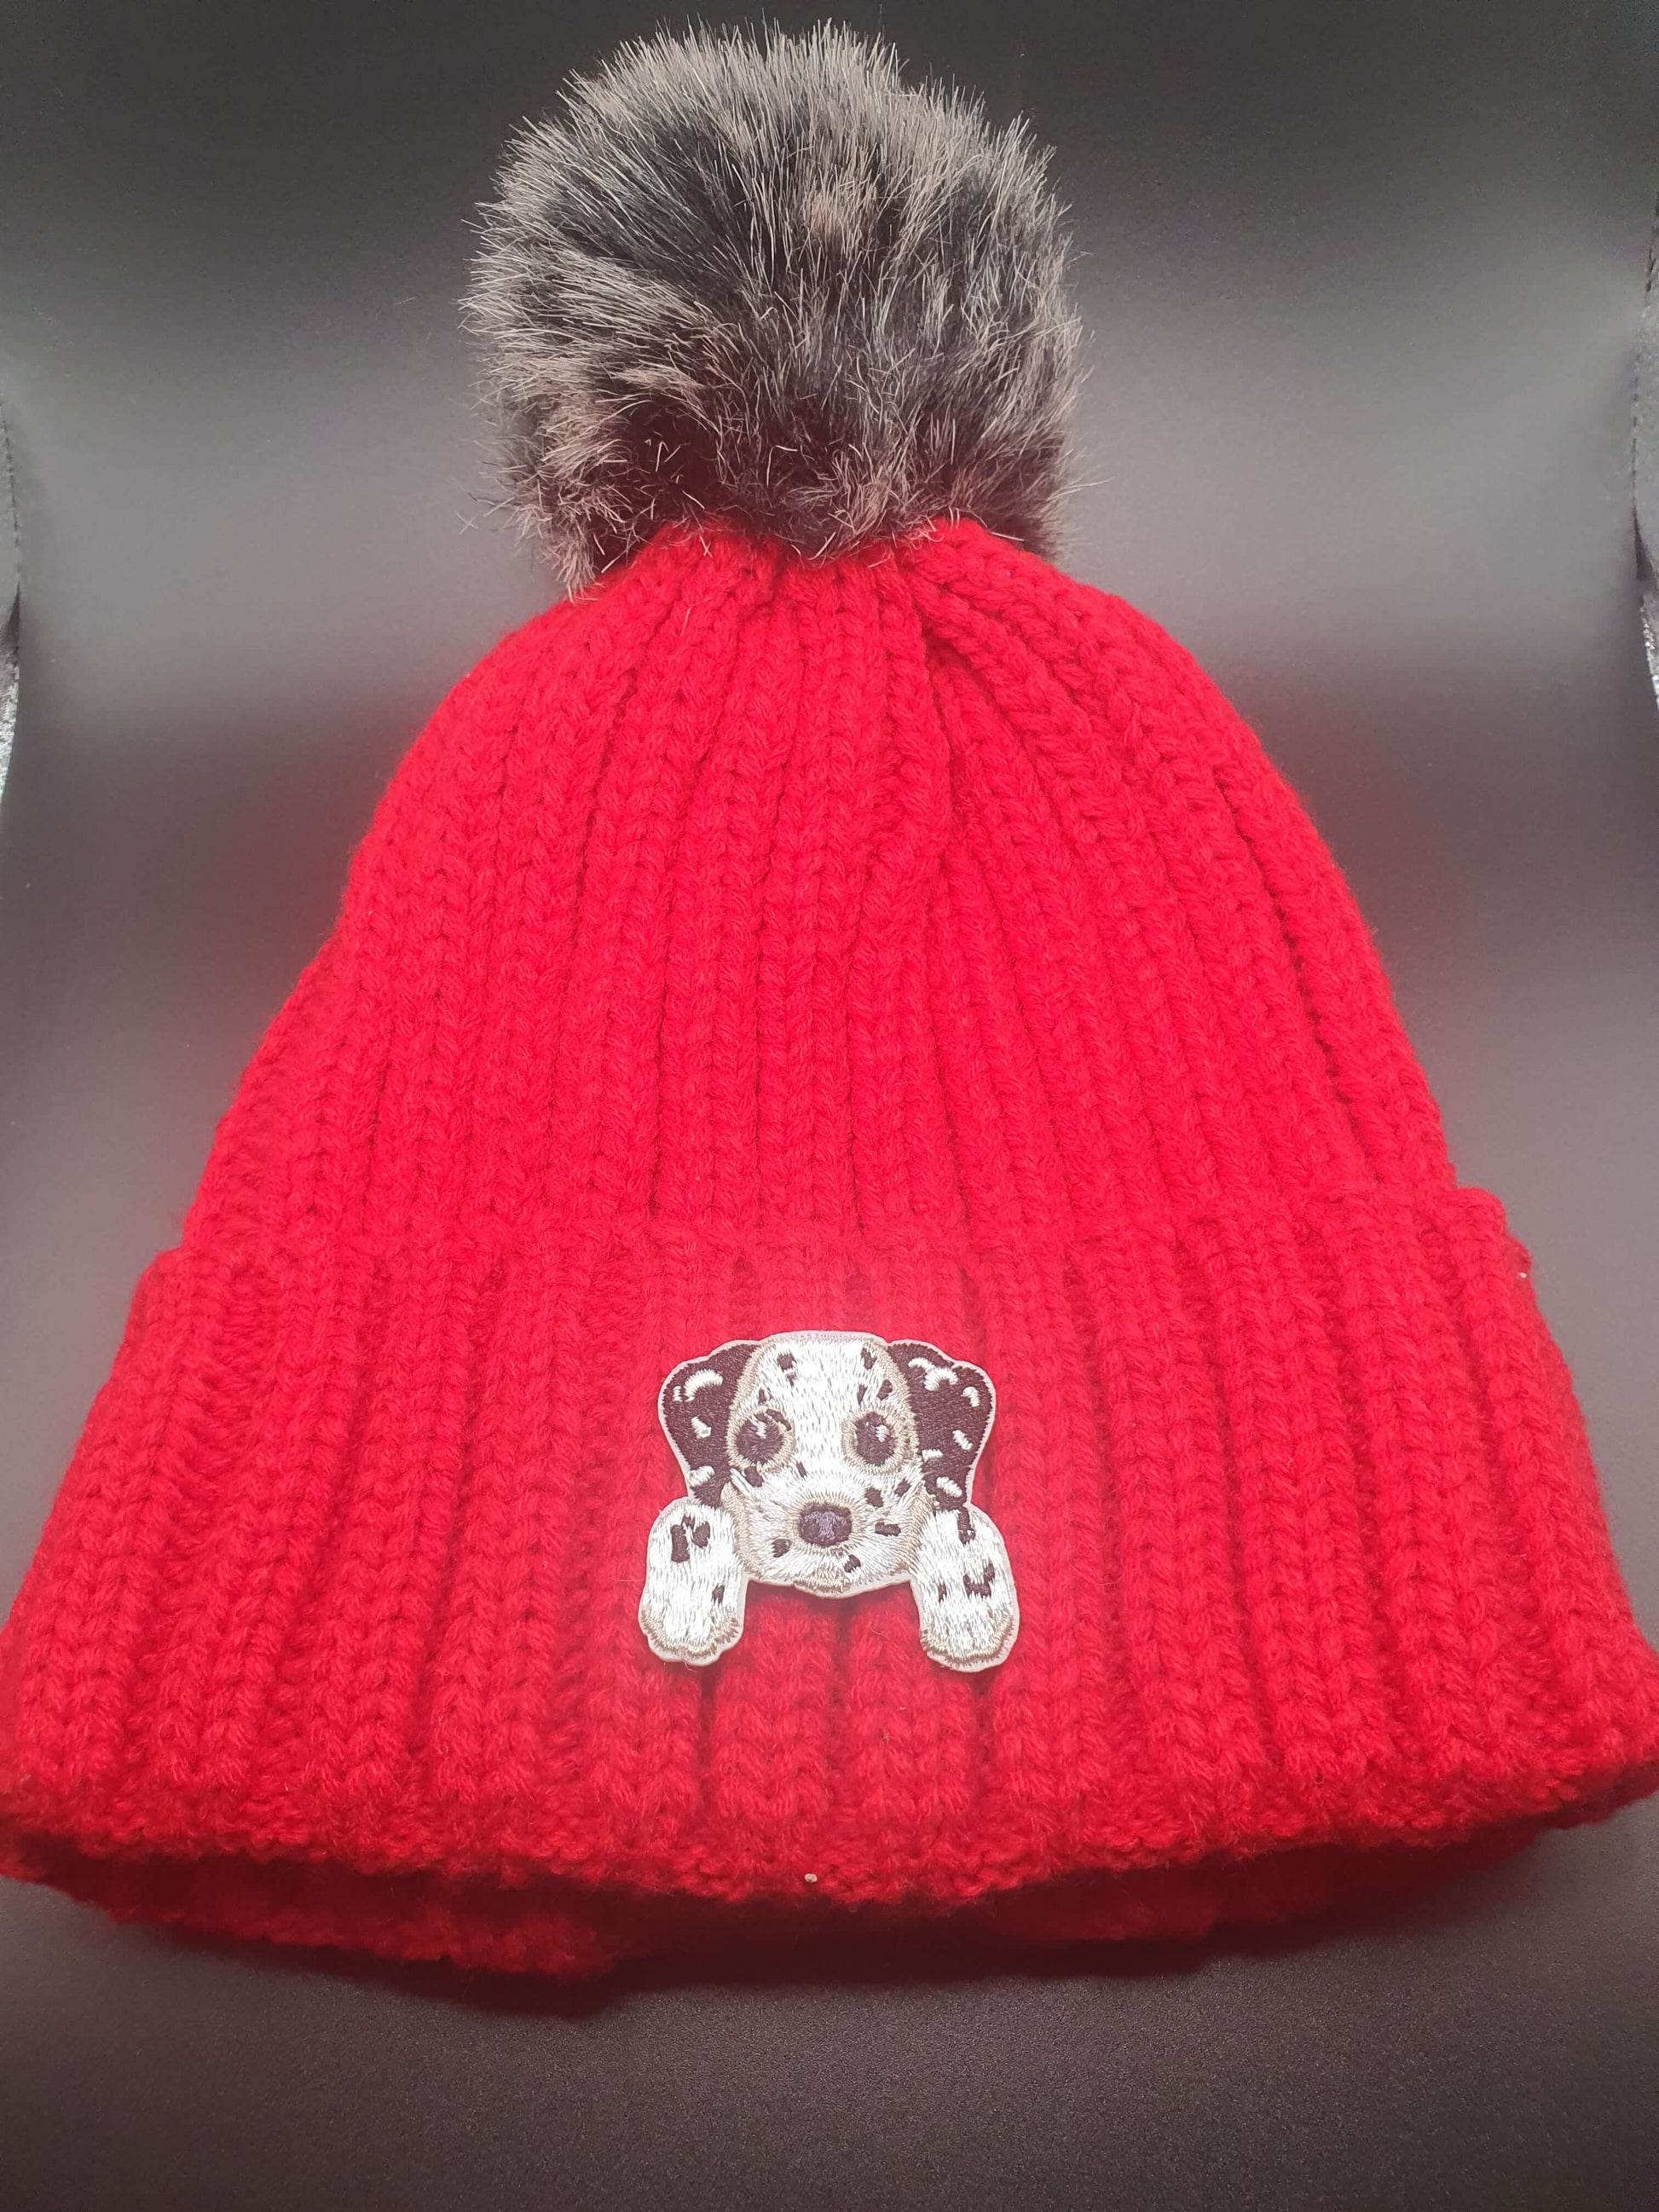 Dog Themed Knitted Beanies - Style's Bug Dalmatian / Red